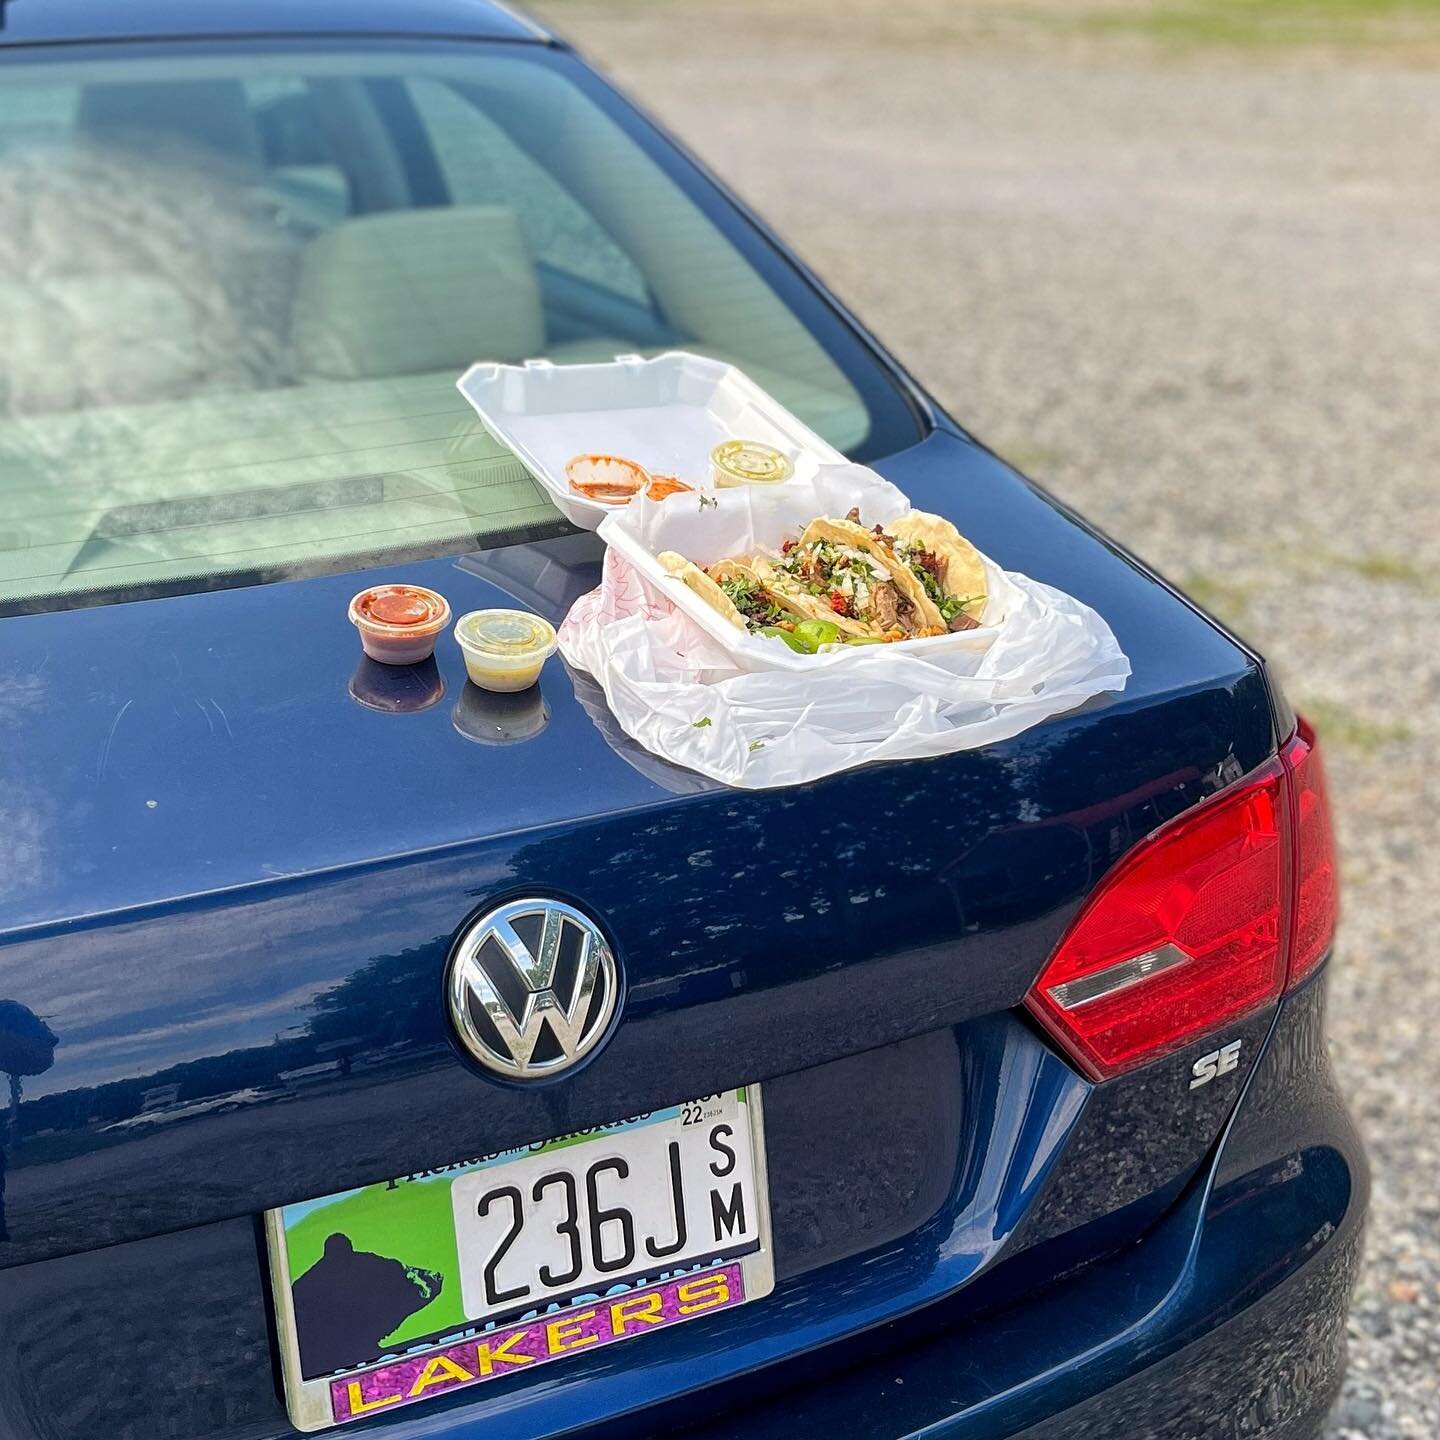 Not enough people eat on the trunk of their car here